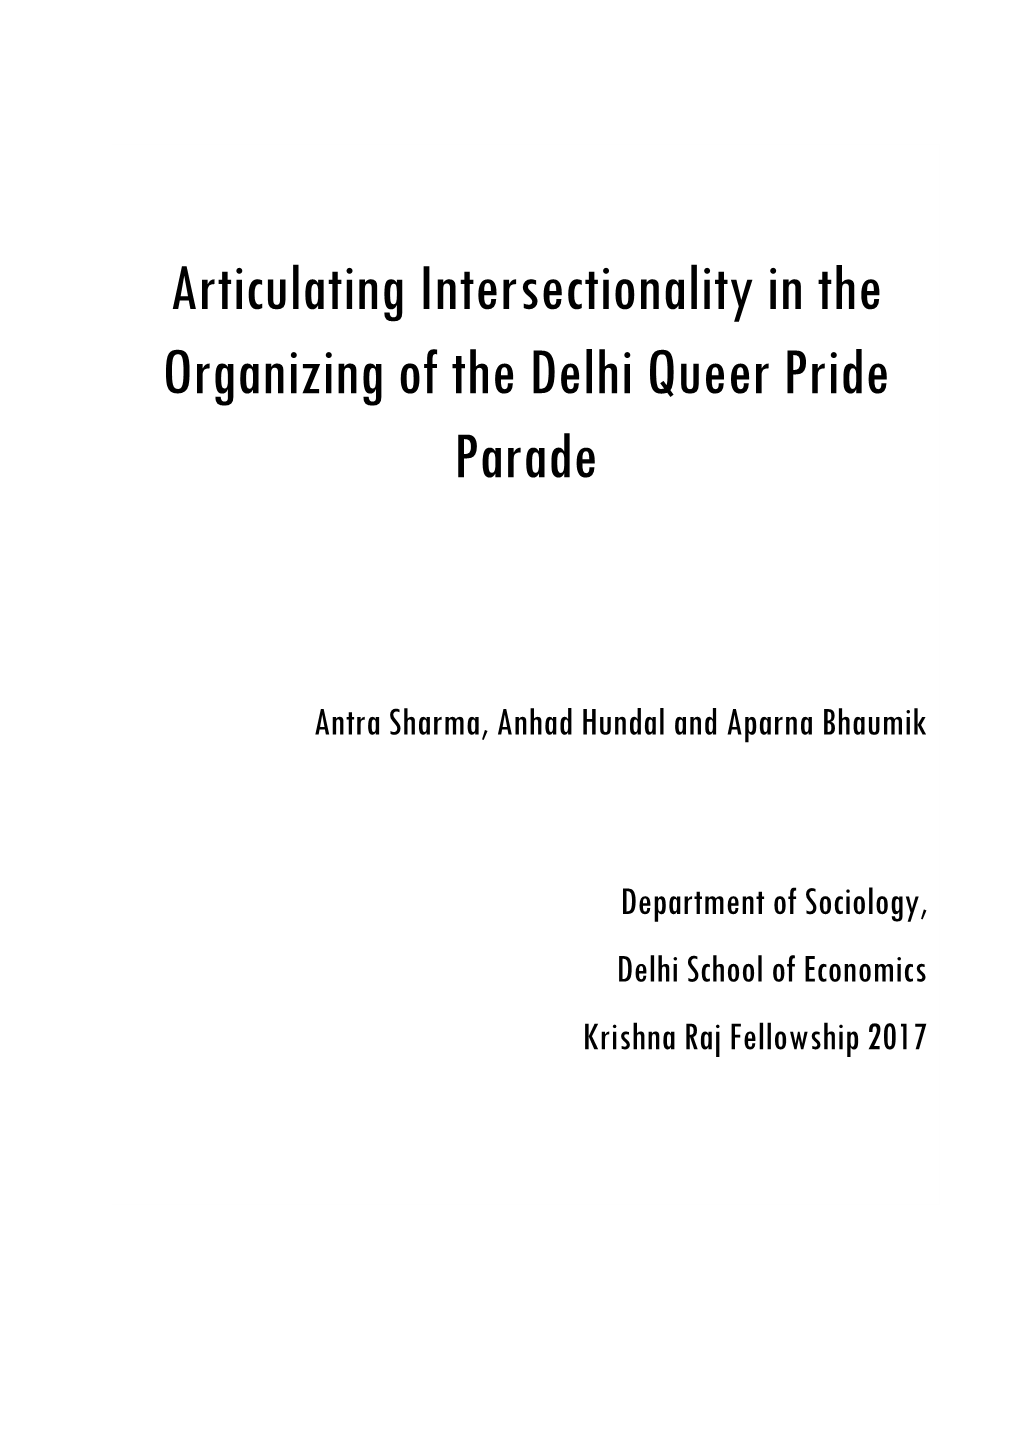 Articulating Intersectionality in the Organizing of the Delhi Queer Pride Parade